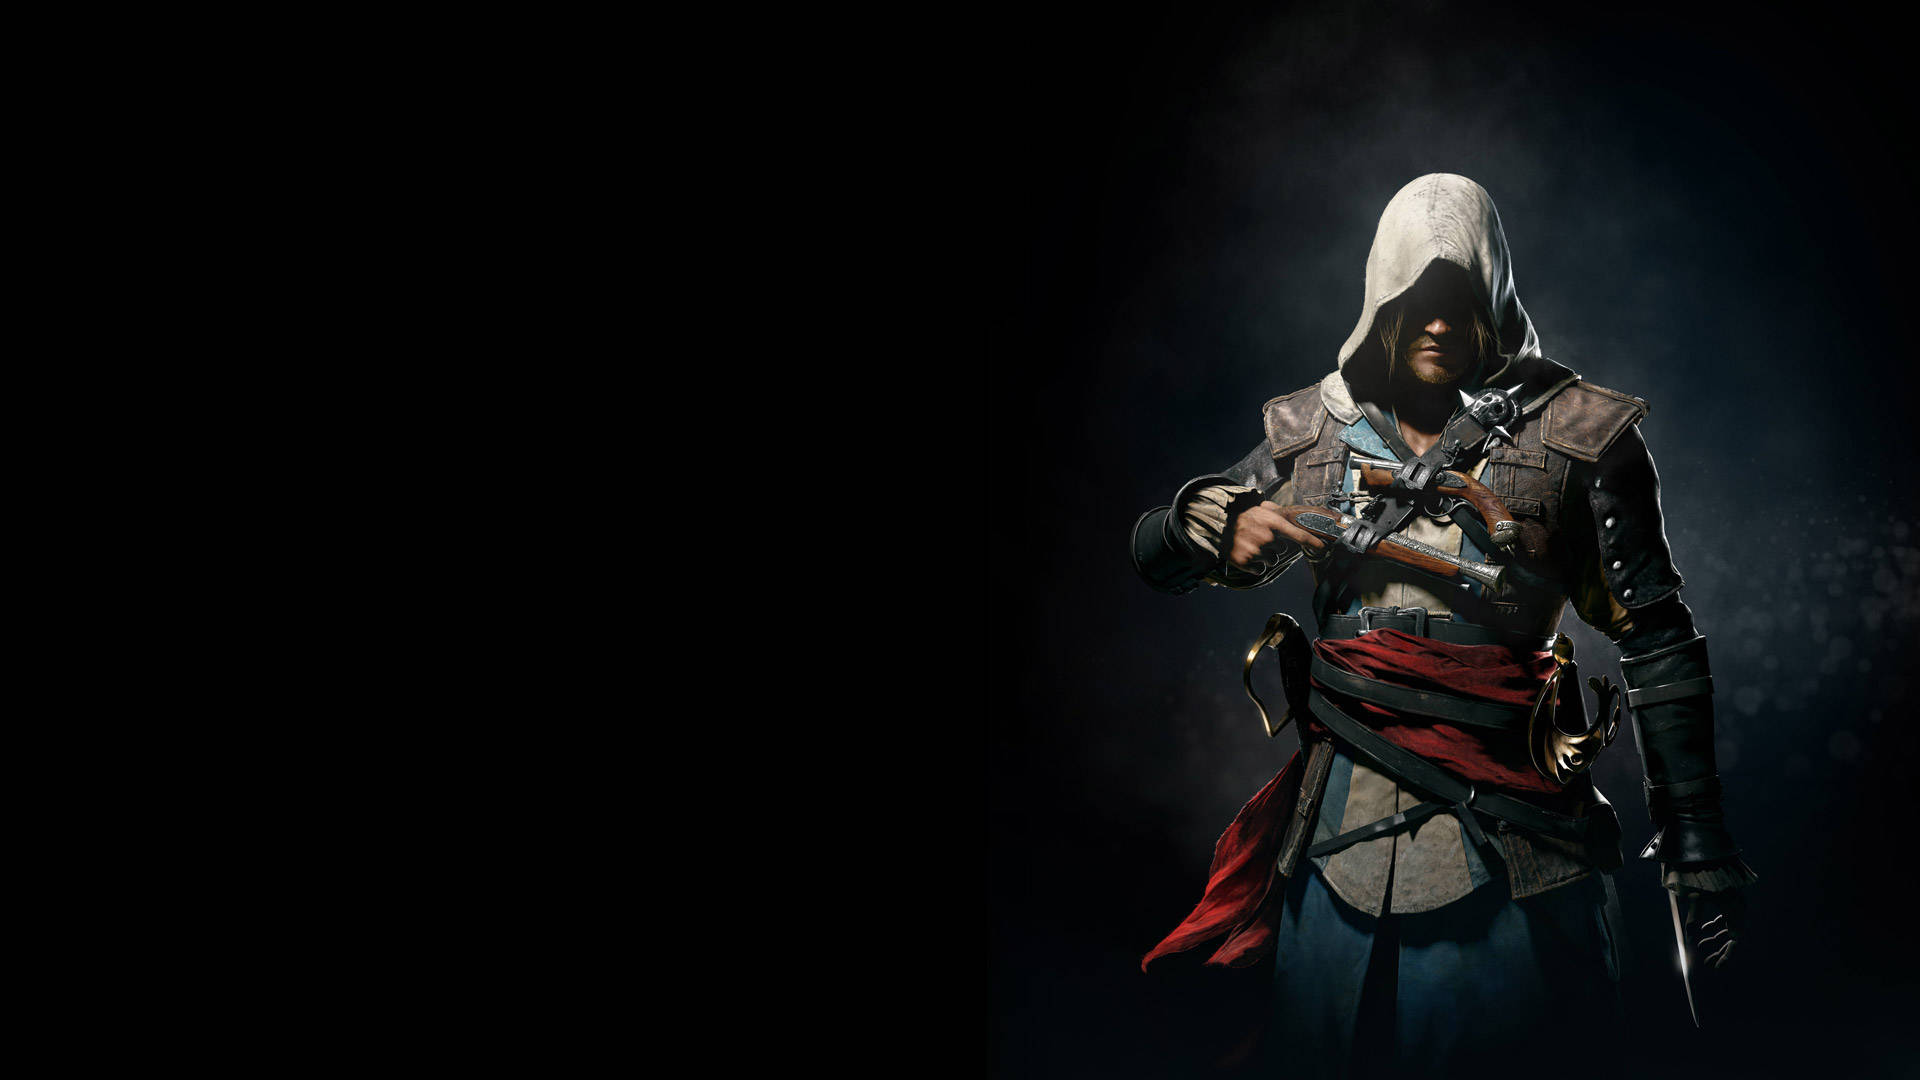 Gothic Assassin's Creed Black Flag Character Wallpaper